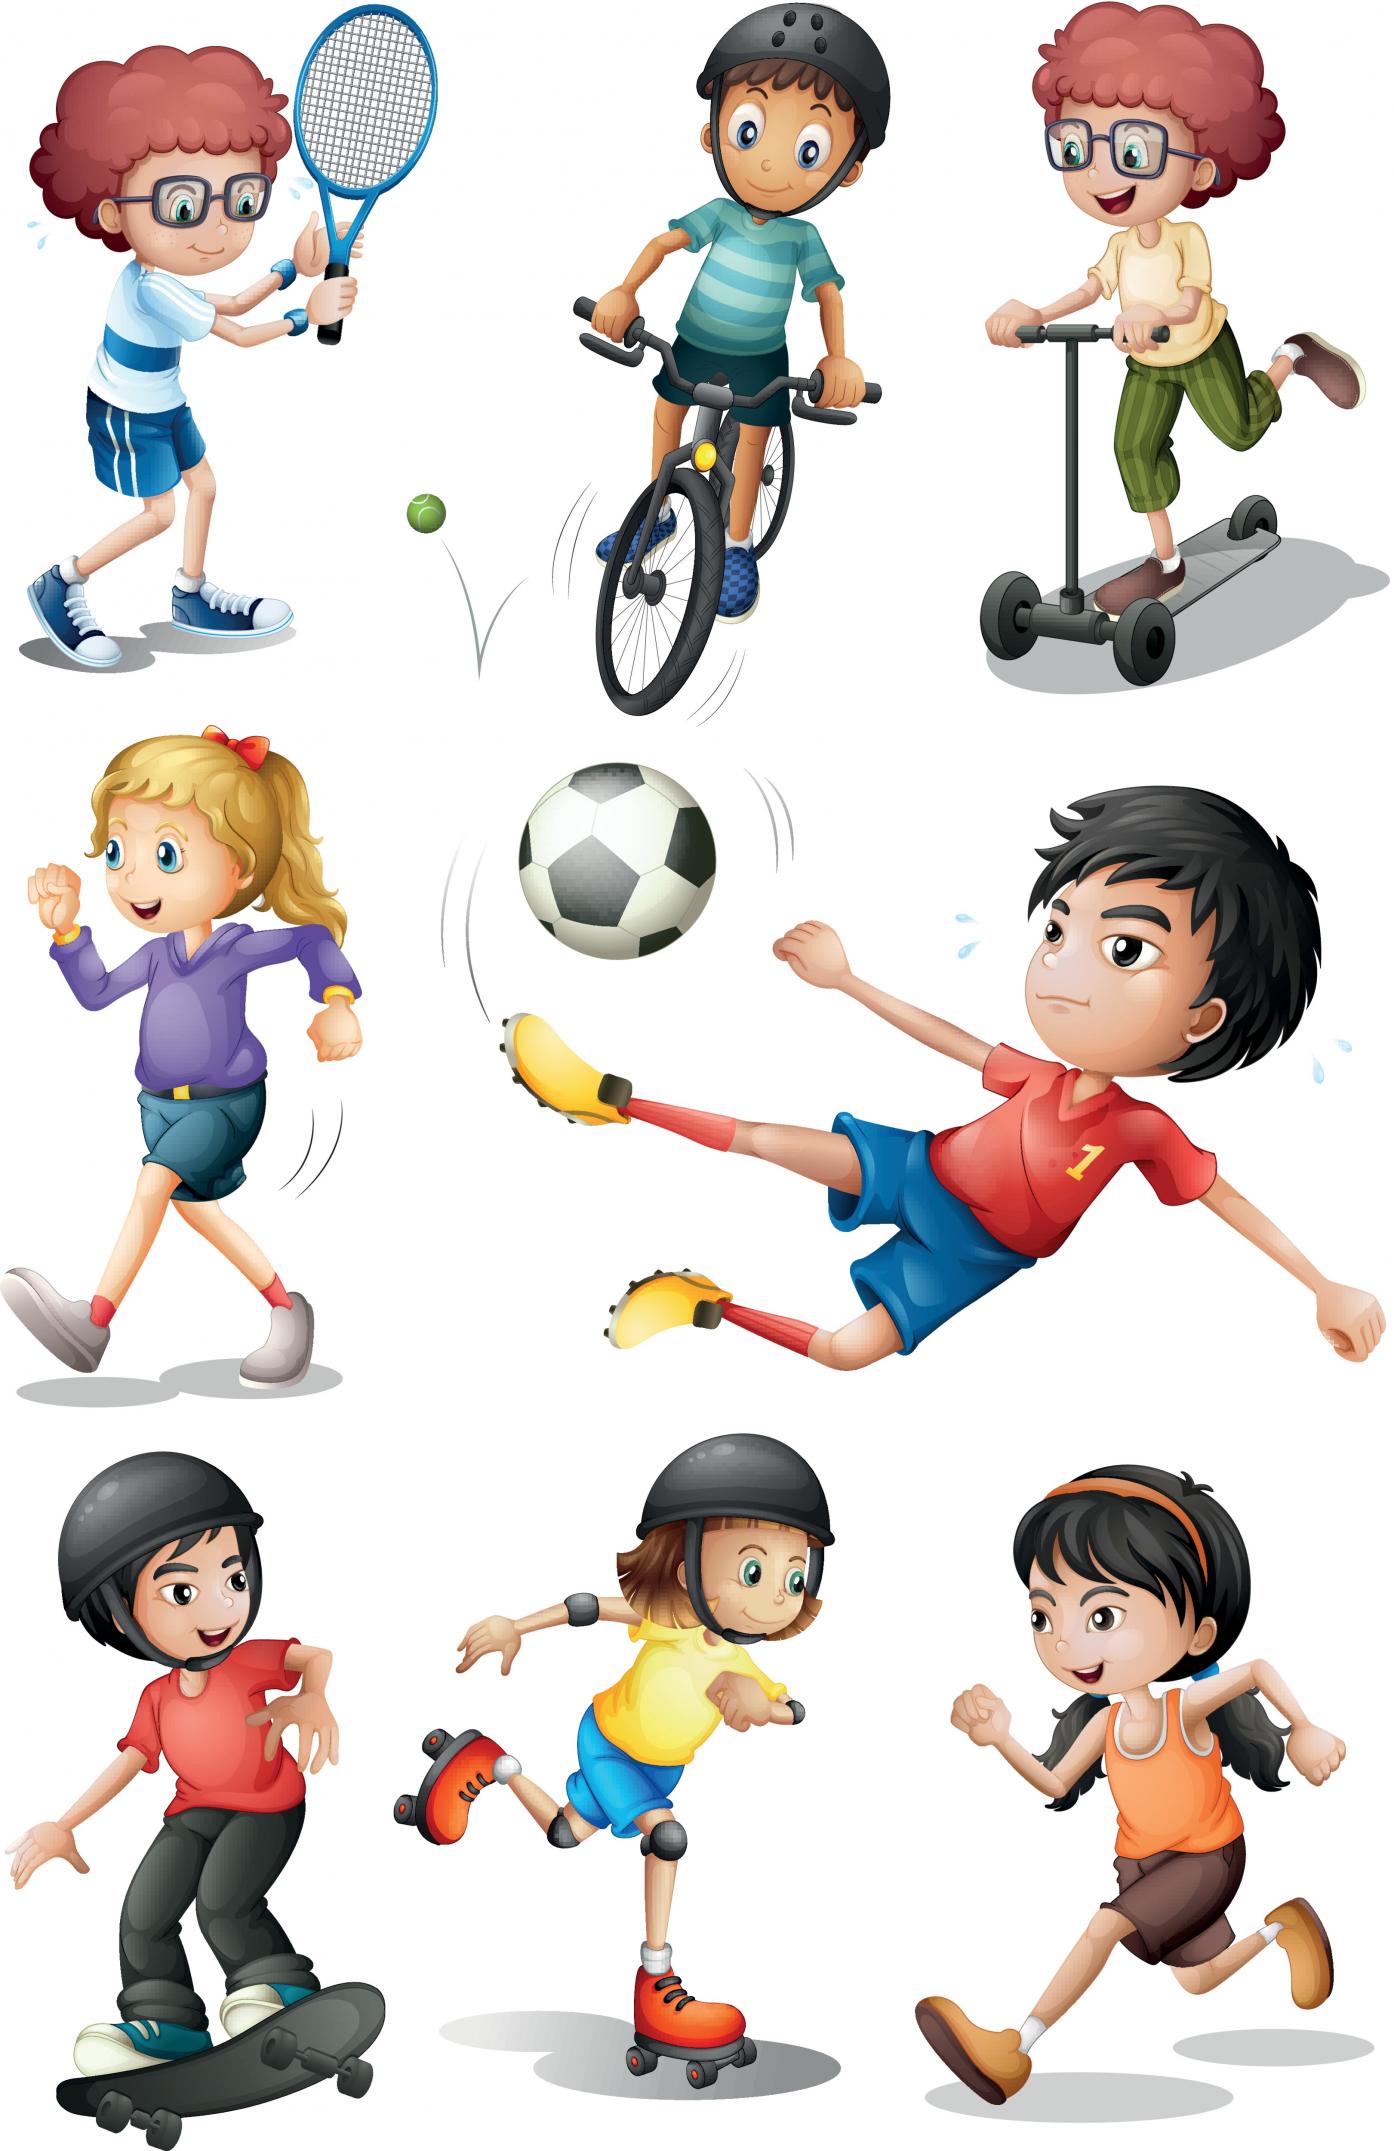 Children Sports Wallpapers High Quality | Download Free